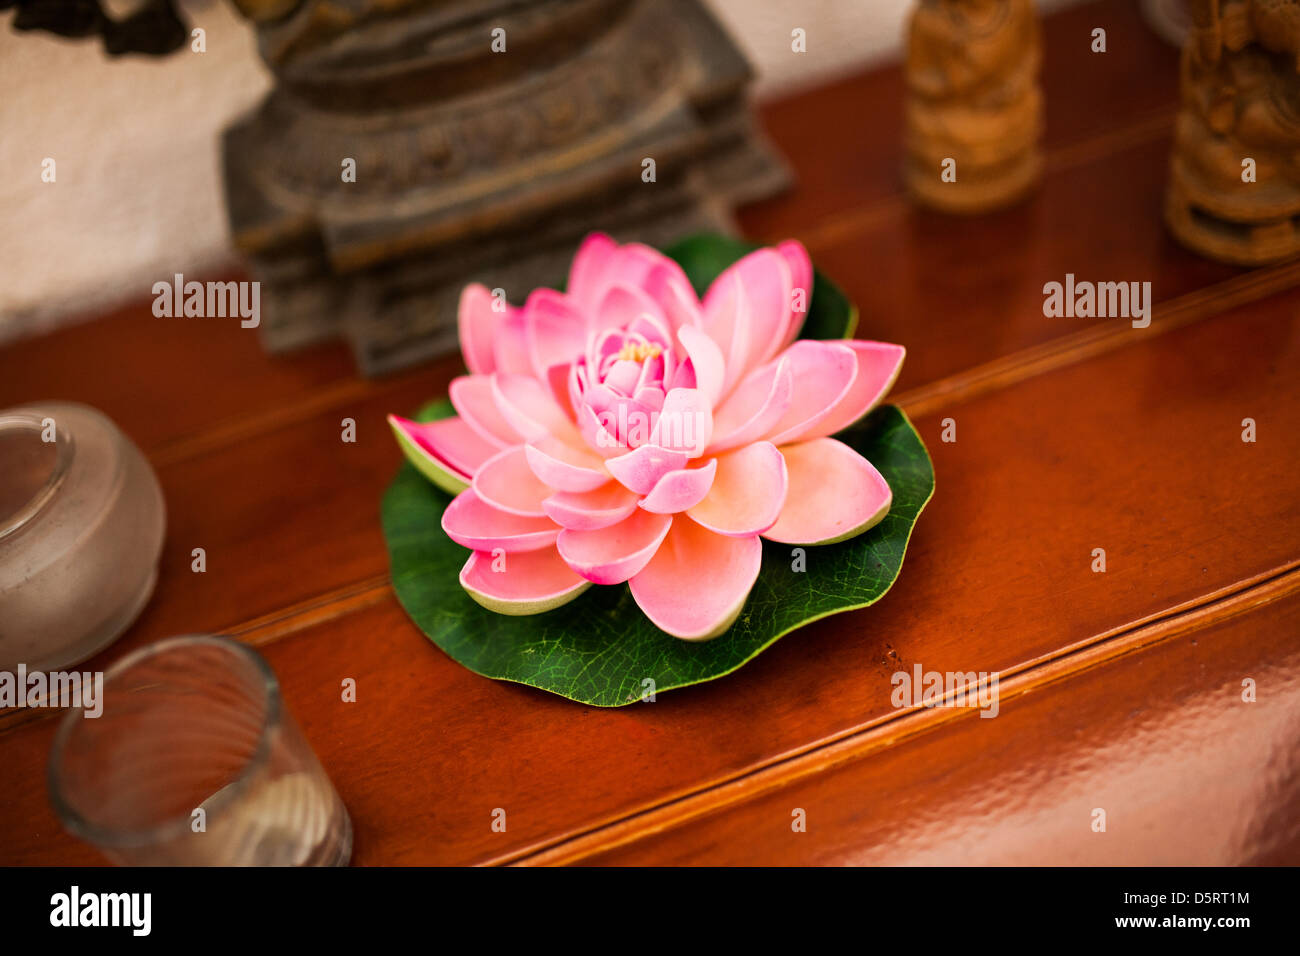 A lotus flower candle, which is associated with purity and beauty. Stock Photo